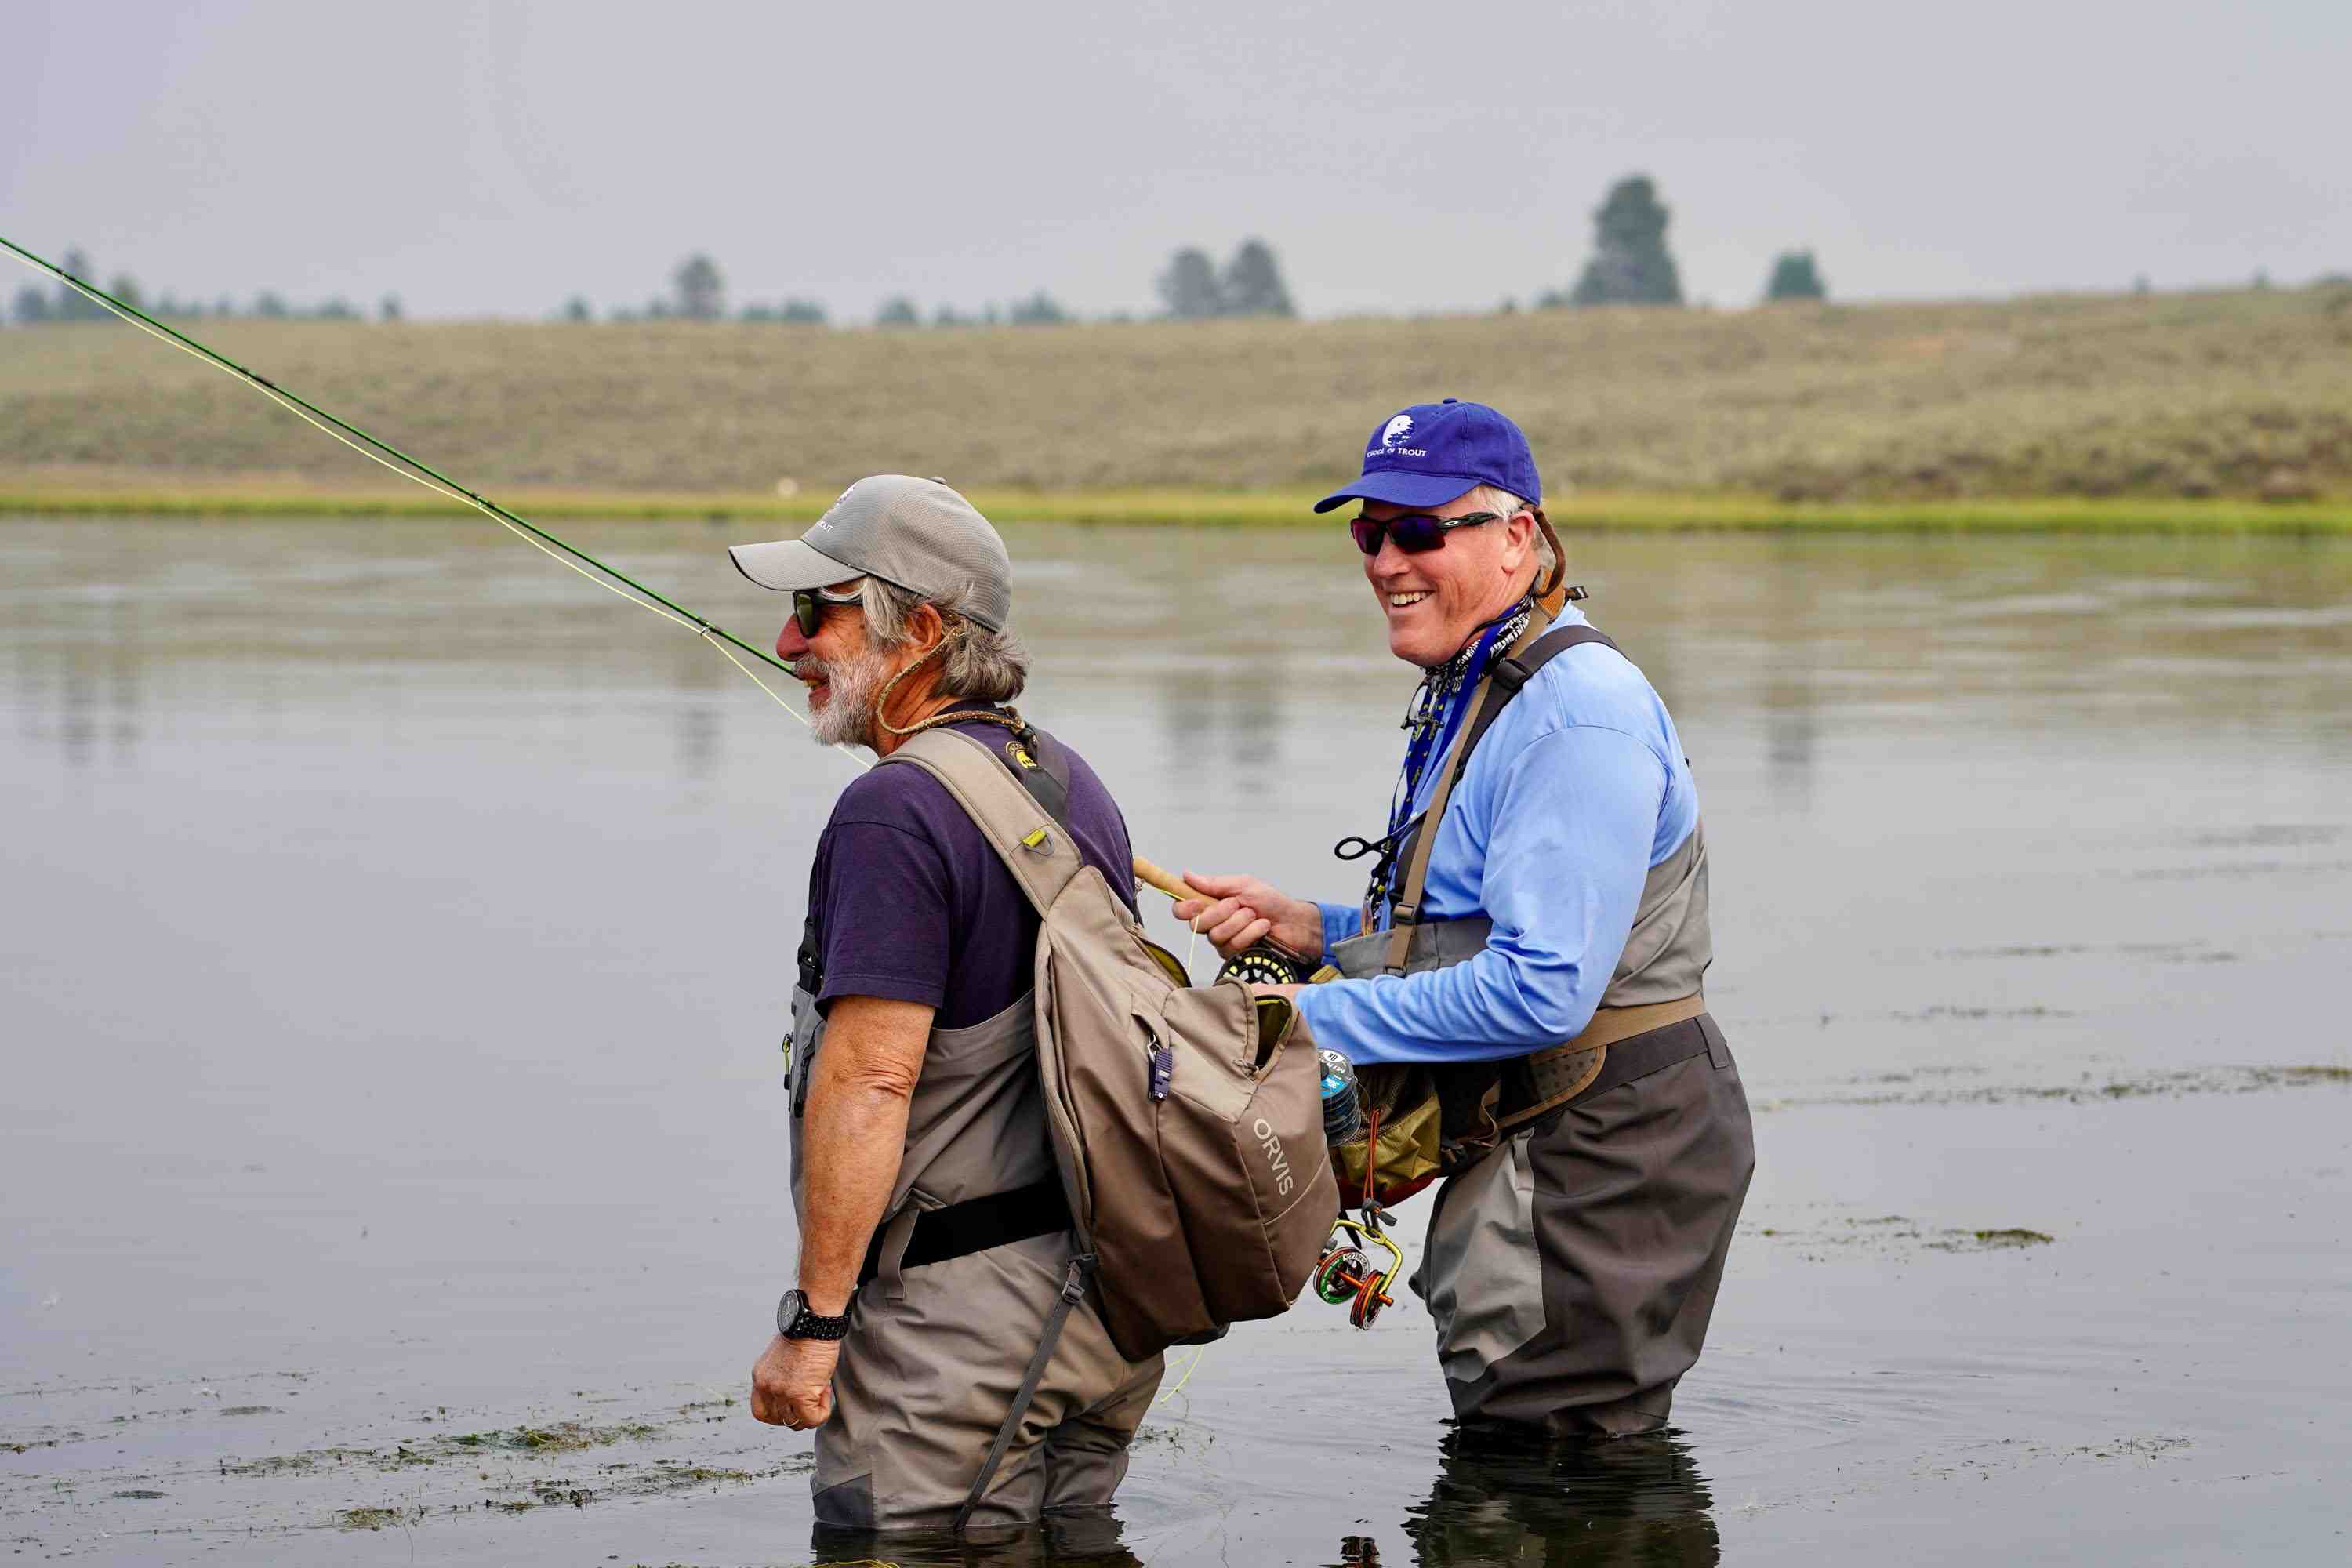 Fly Fishing and Hunting Adventures, Orvis Trips & Schools